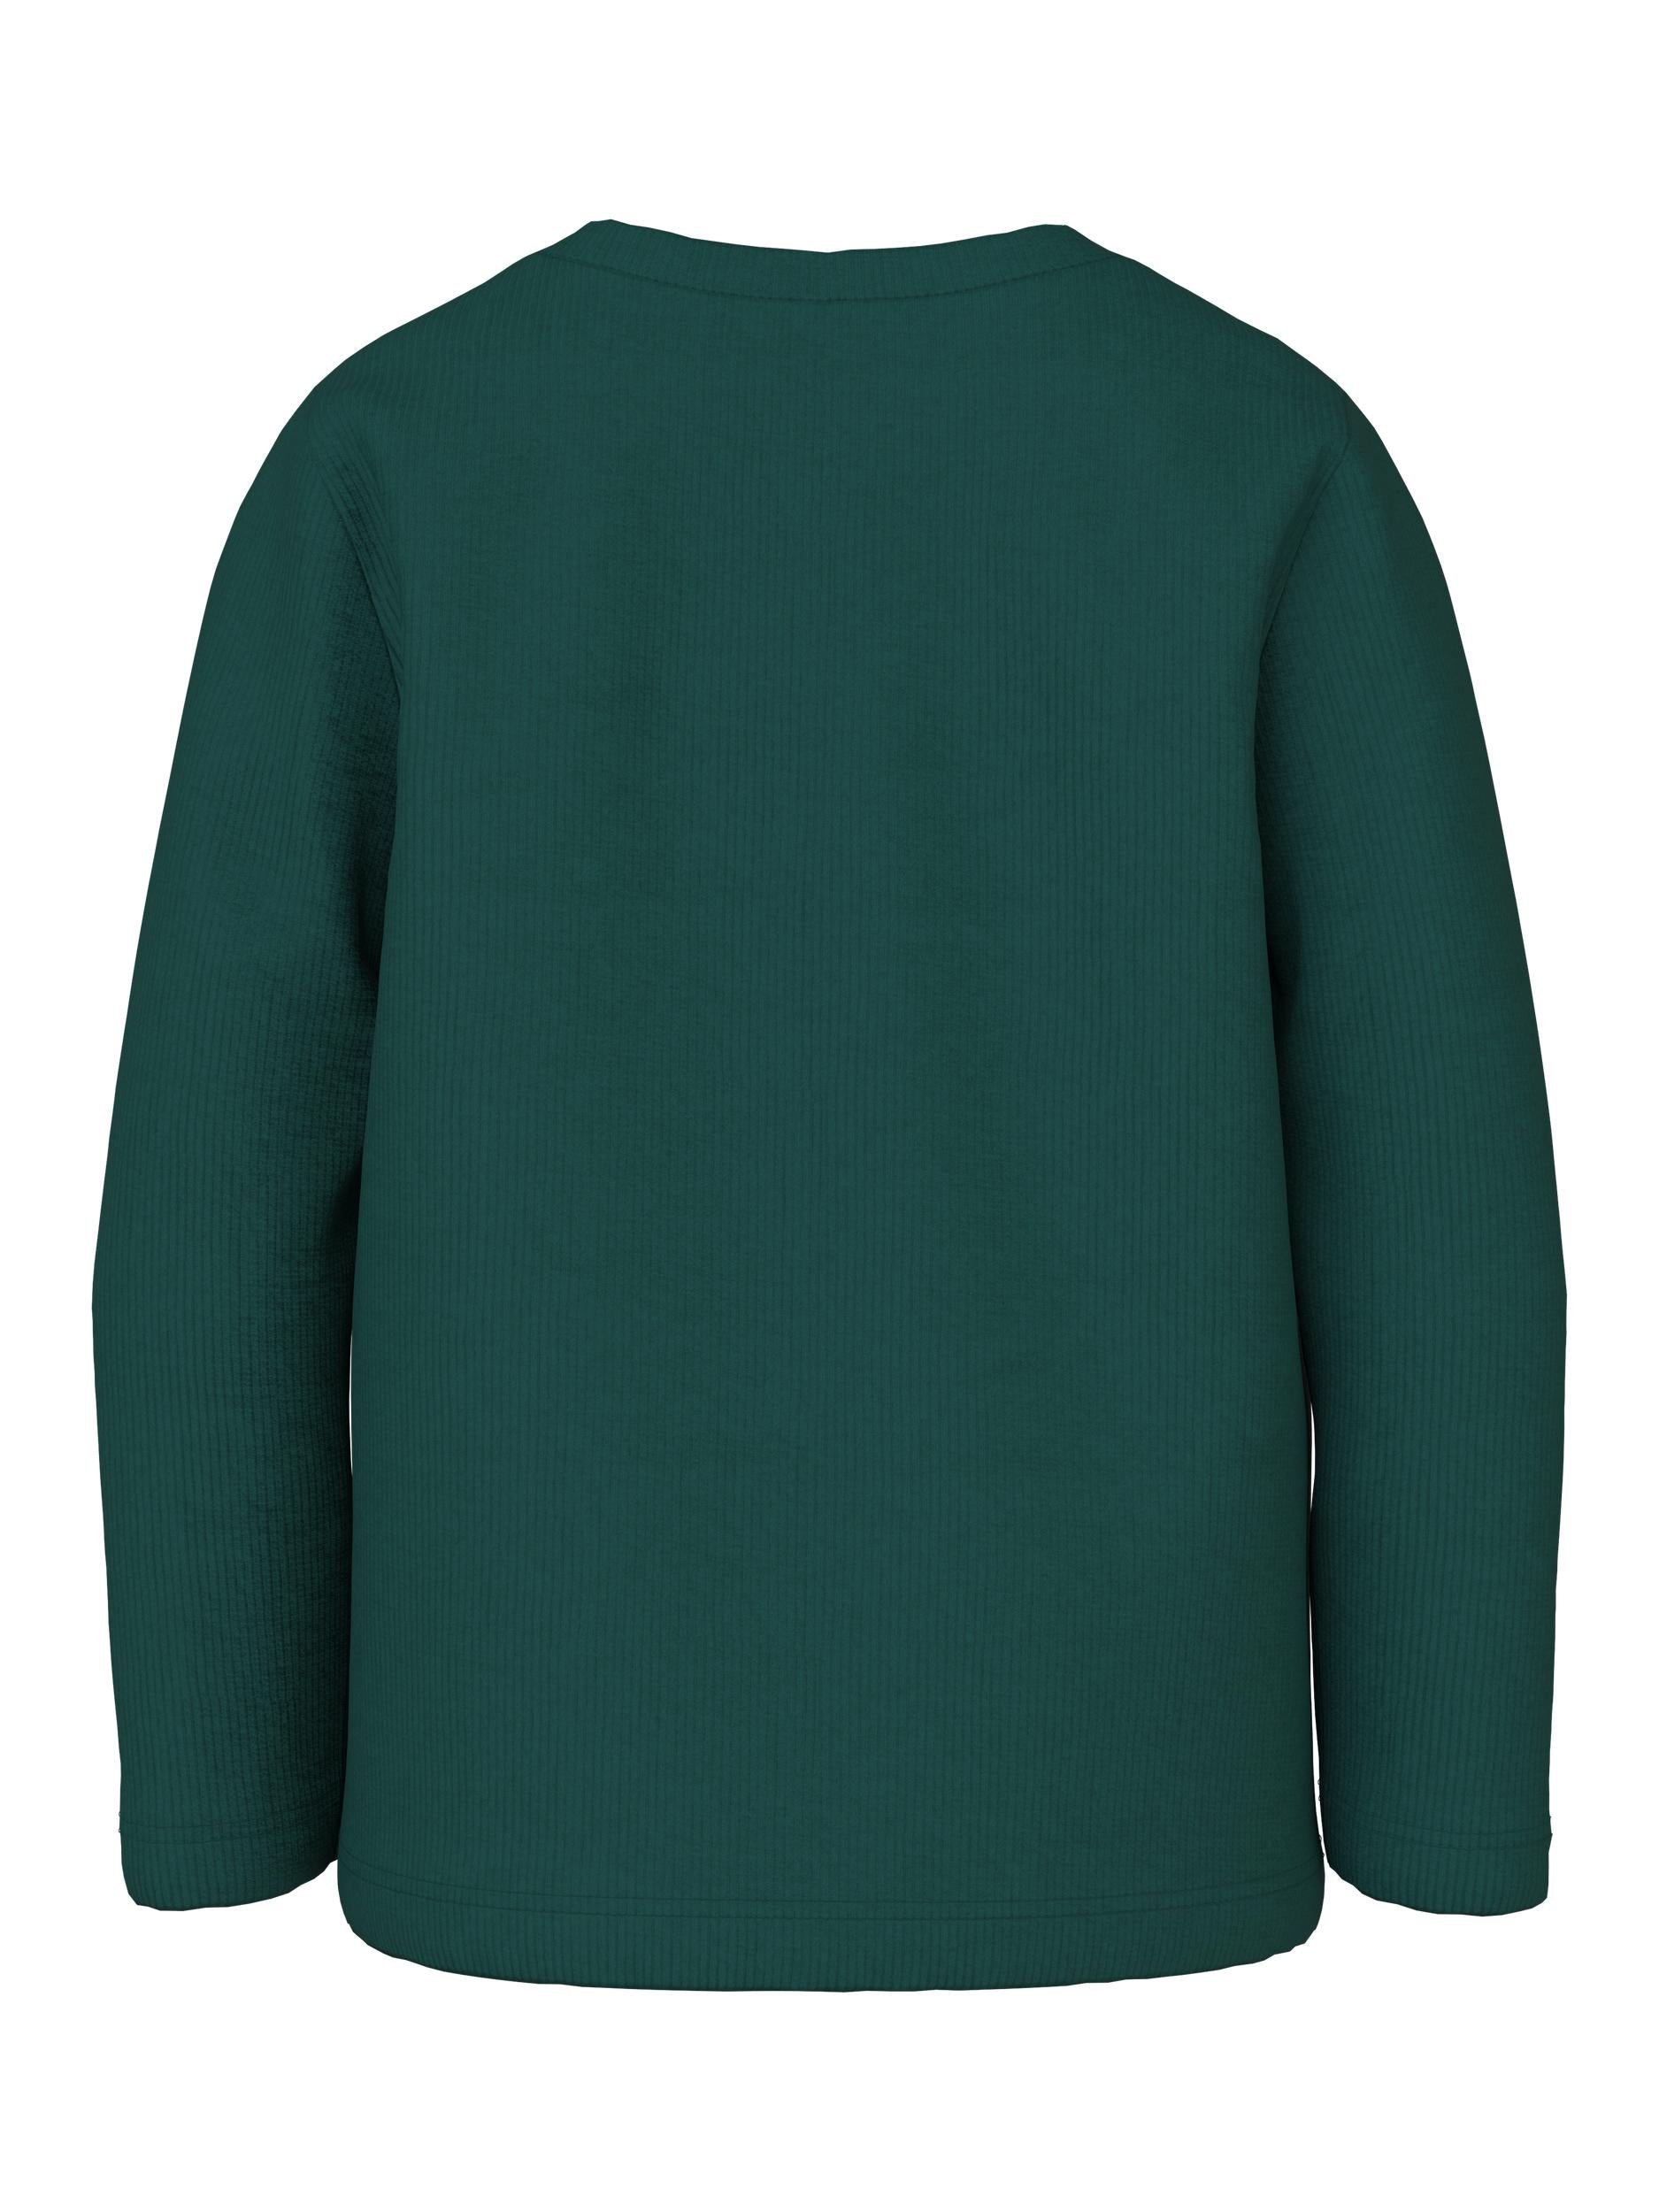 Boy's Ricco Long Sleeve Top-Forest Biome-Back View